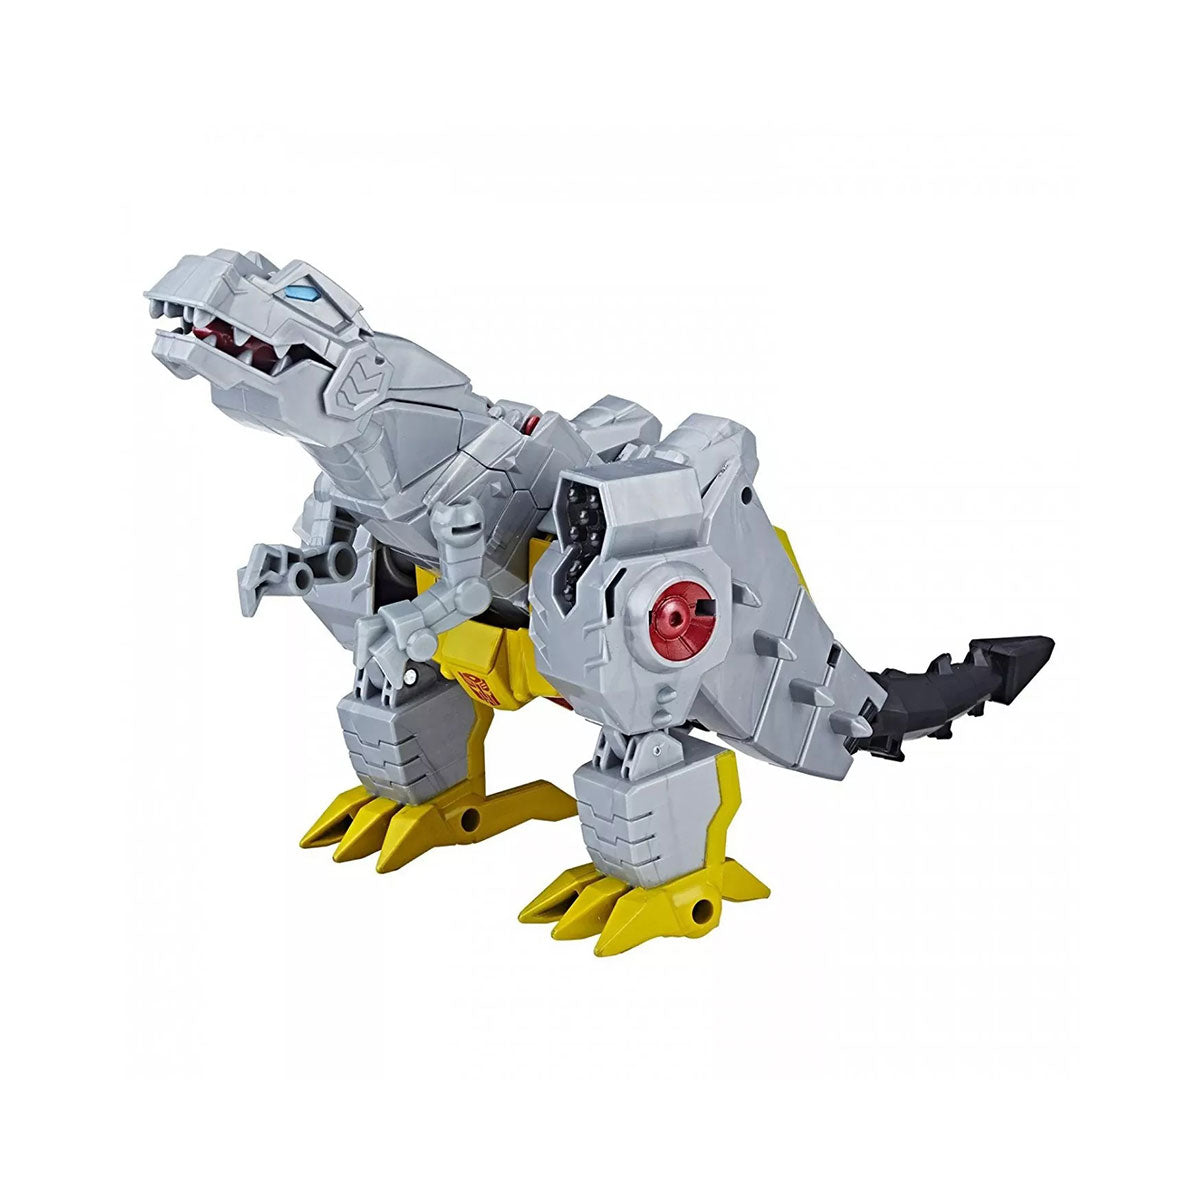 Transformers - Cyberverse Ultra Skull (Styles Vary - One Supplied)